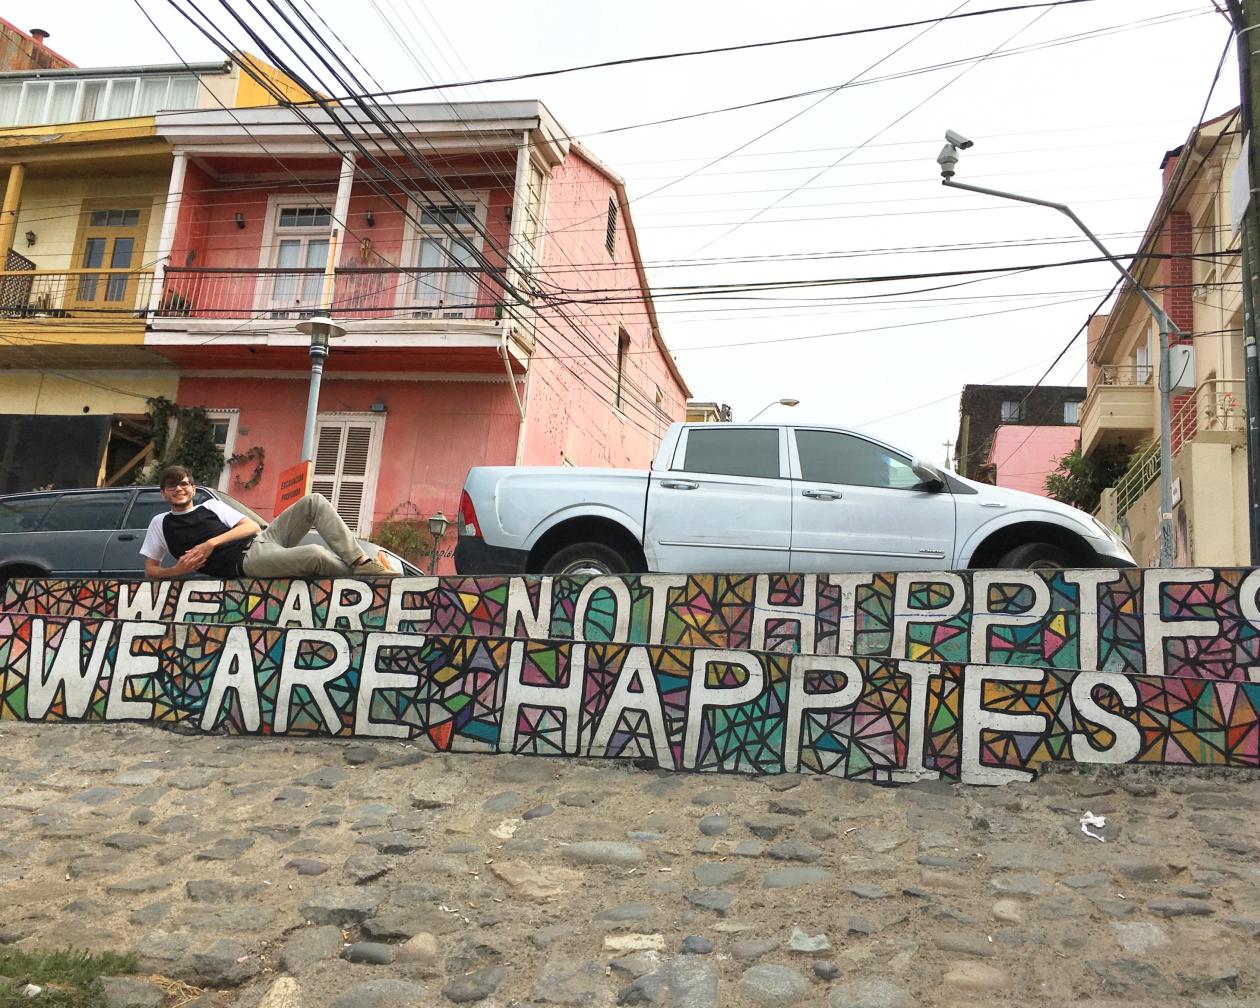 A student lies on a wall that says "we are not hippies, we are happies"